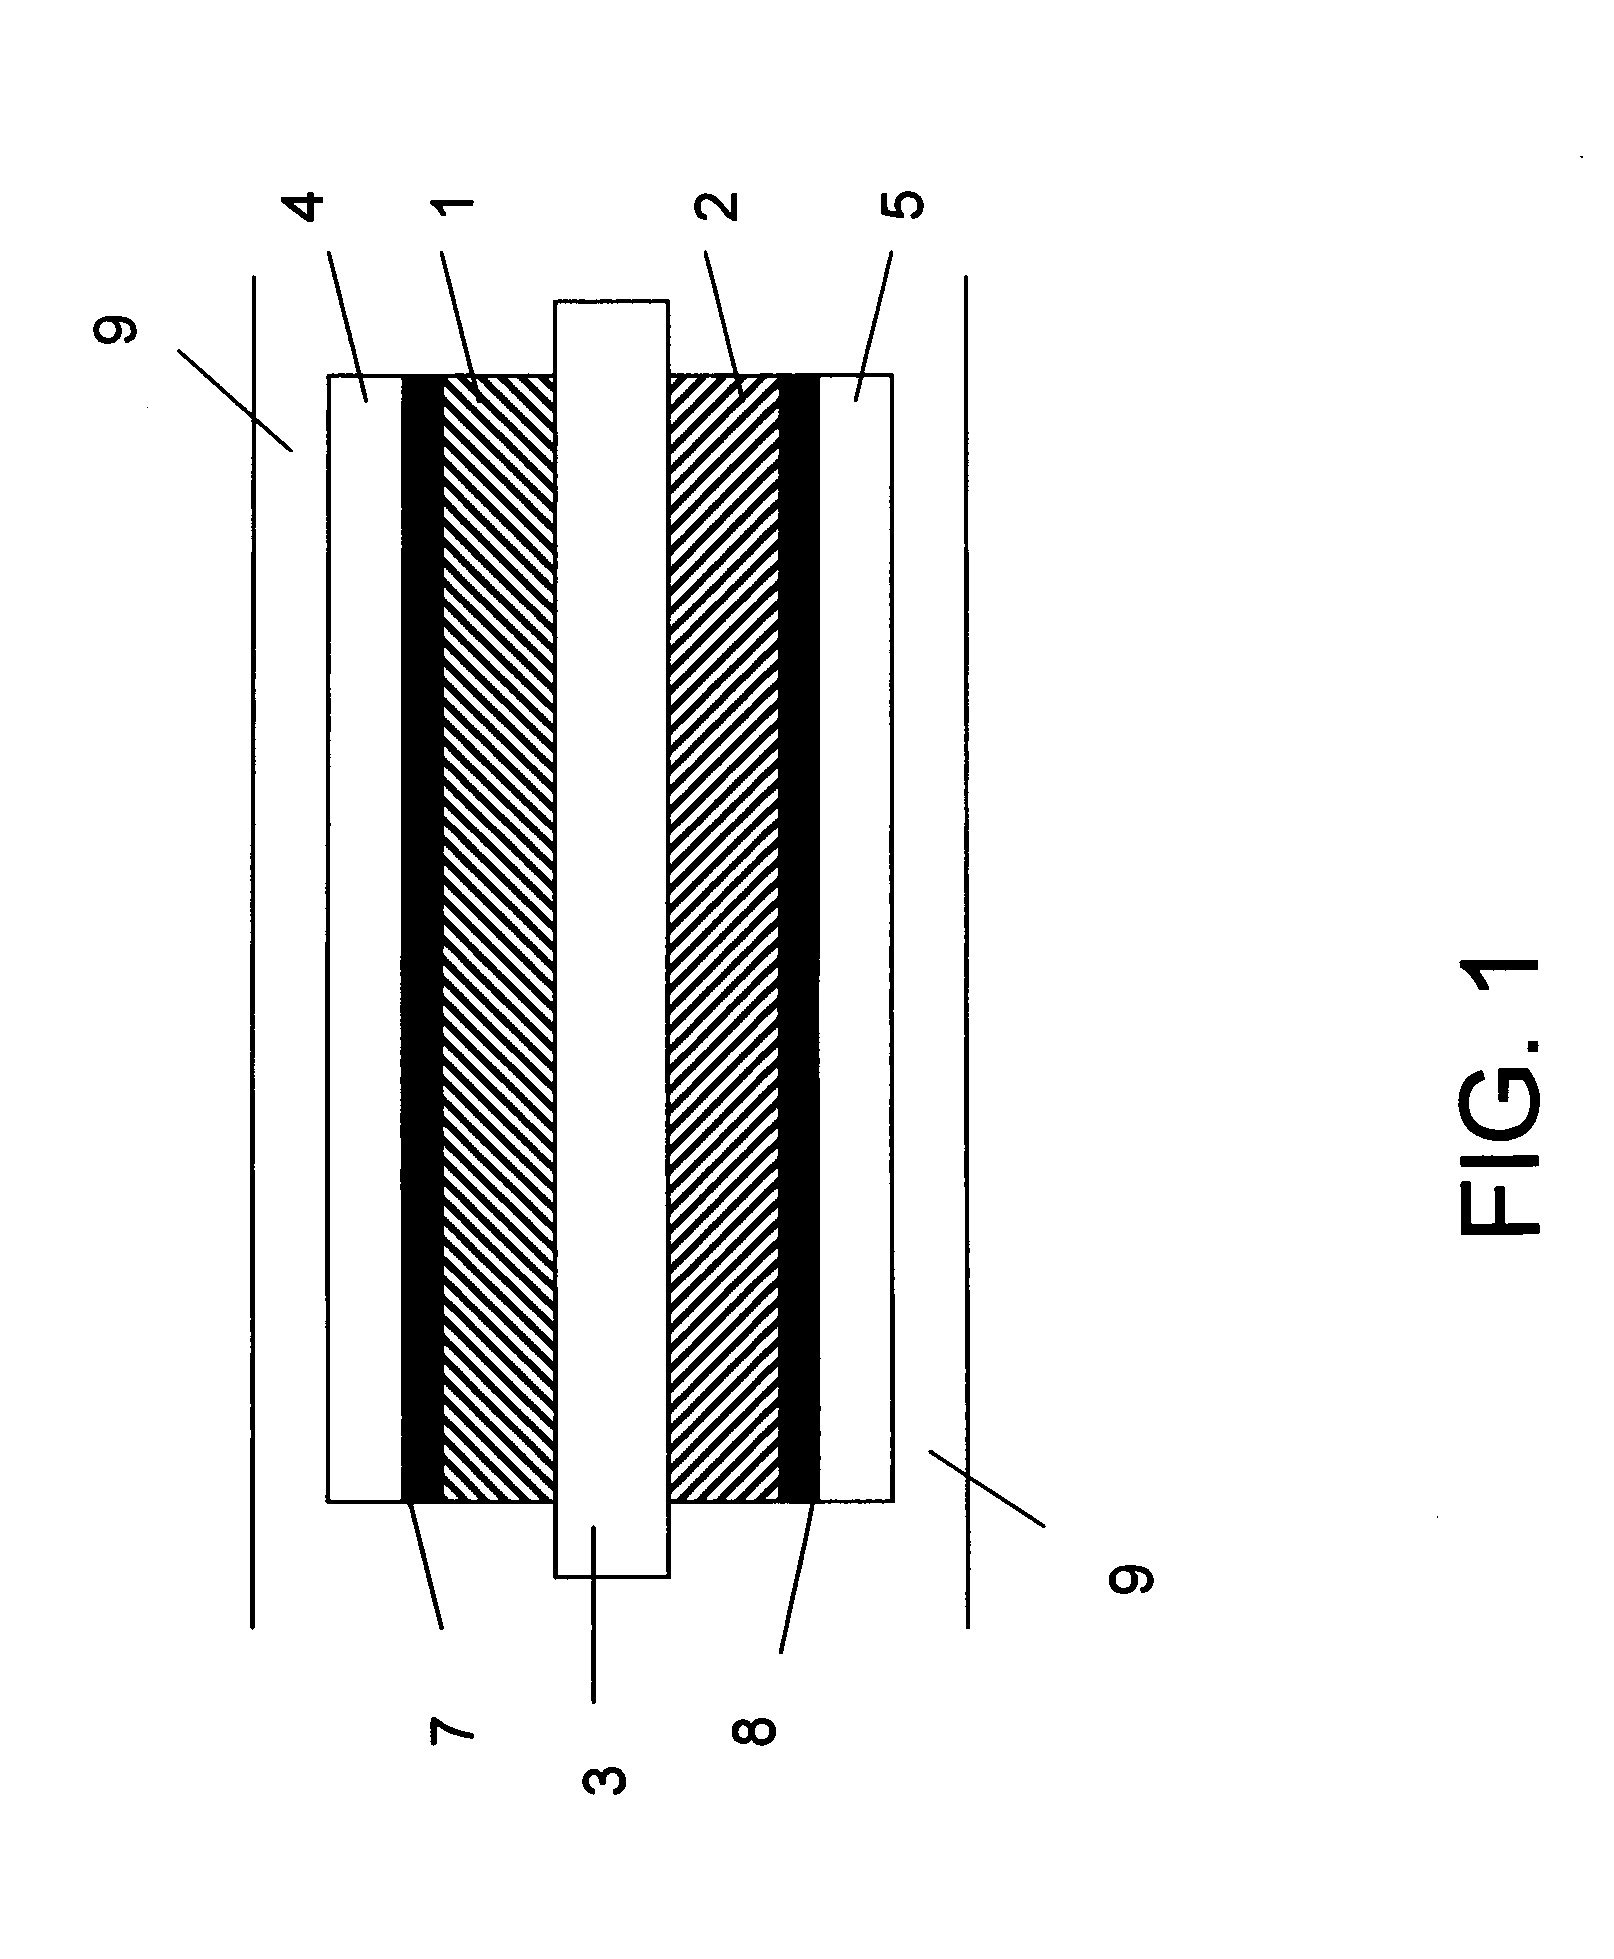 Thin battery and a method of manufacturing a thin battery